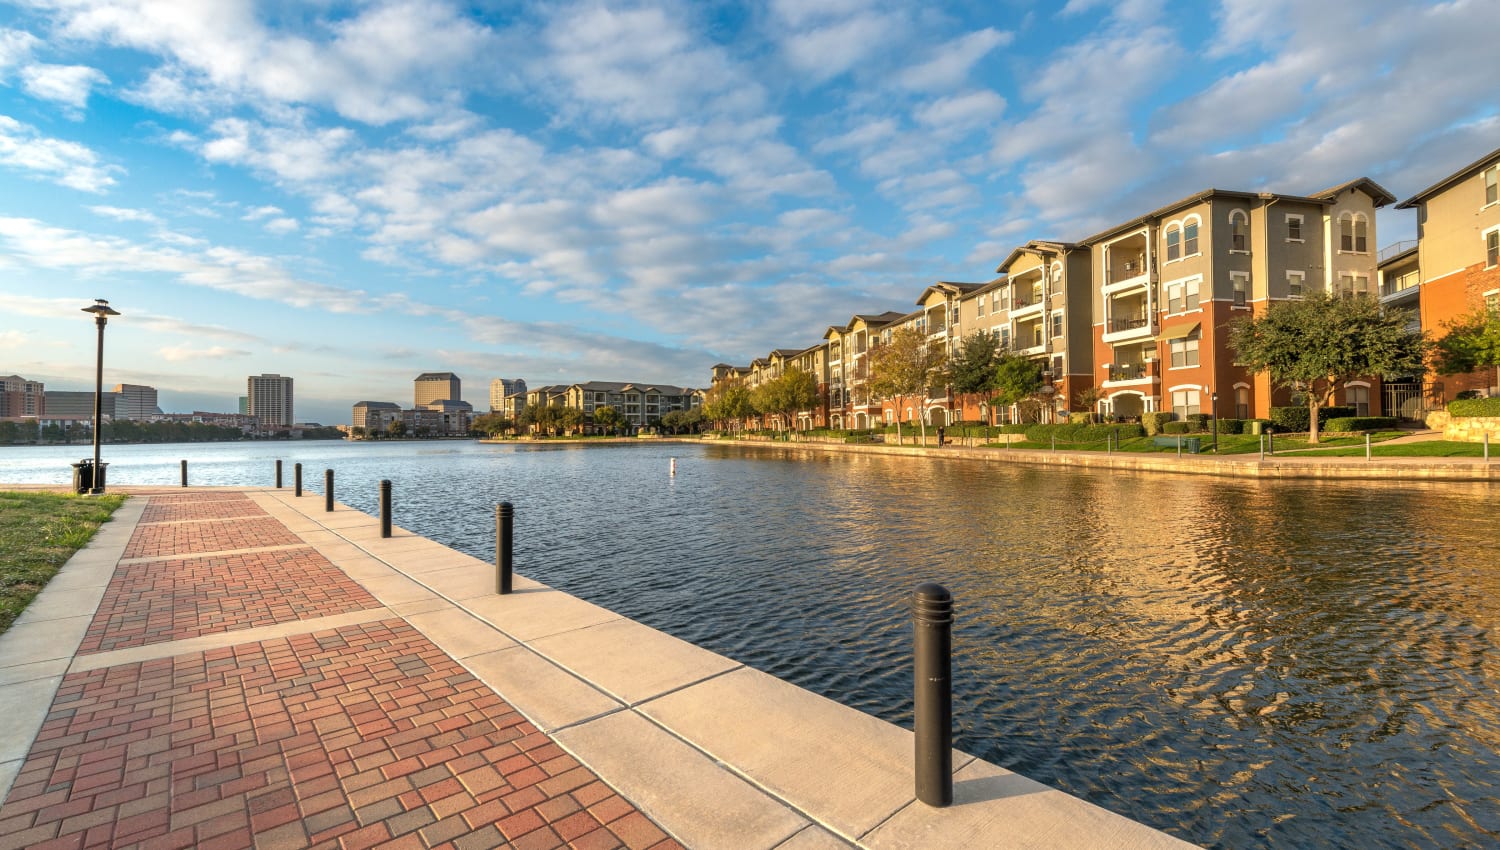 Morning view of our luxury community from across the lake near Olympus Las Colinas in Irving, Texas